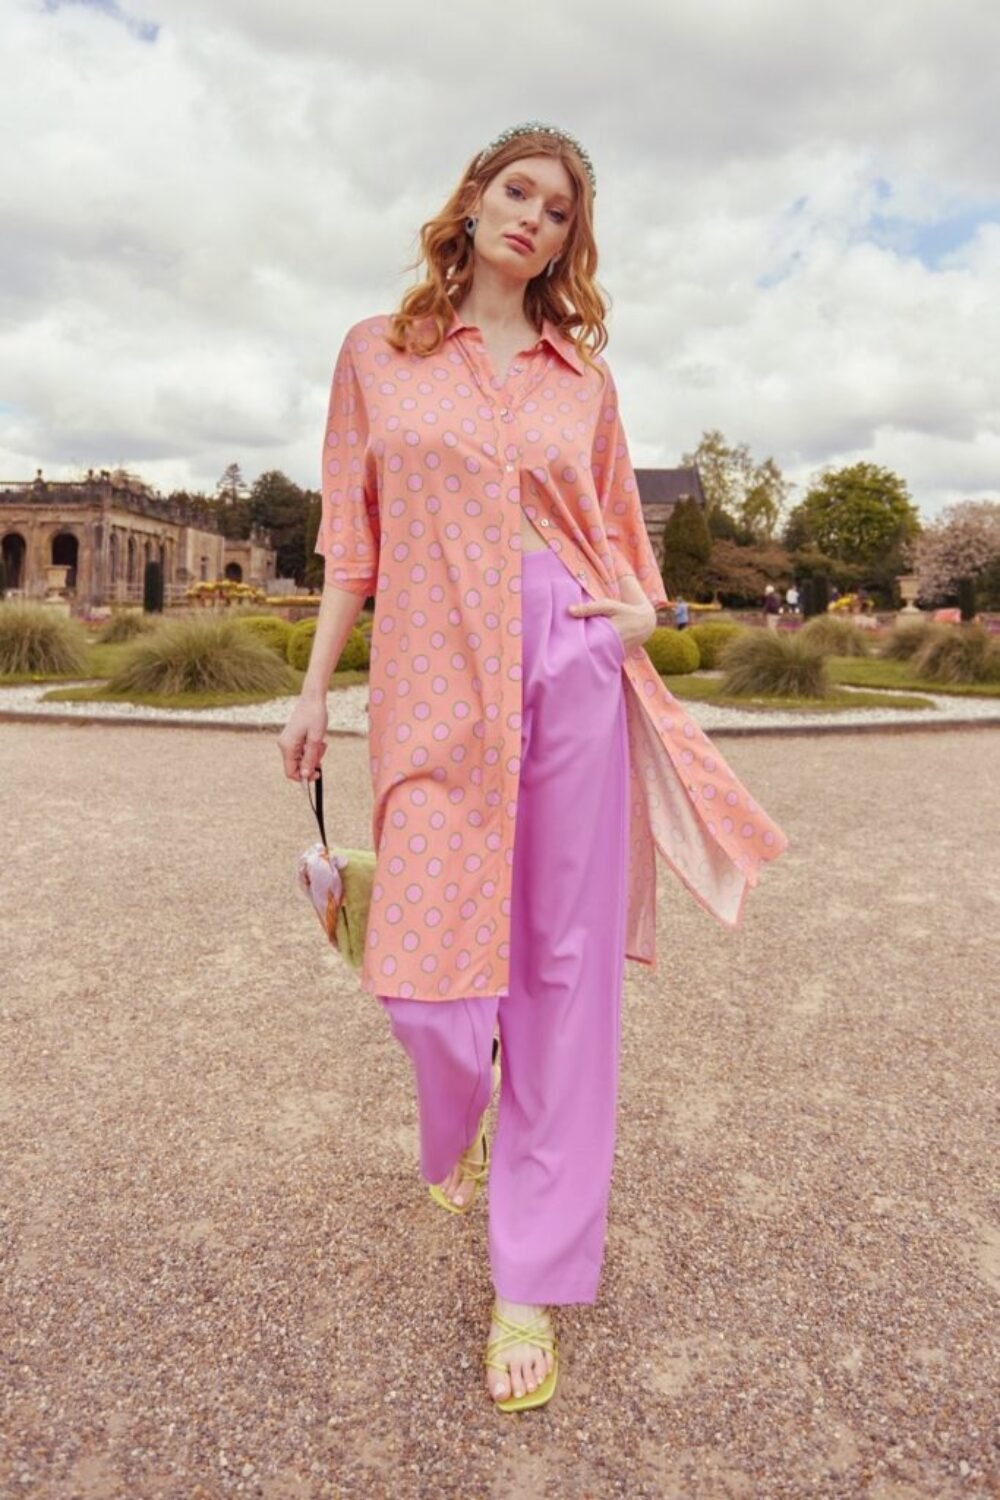 Shop Lux Sustainable Rose Petal Polka Dot Shirt Dress and women's luxury and designer clothes at www.lux-apparel.co.uk